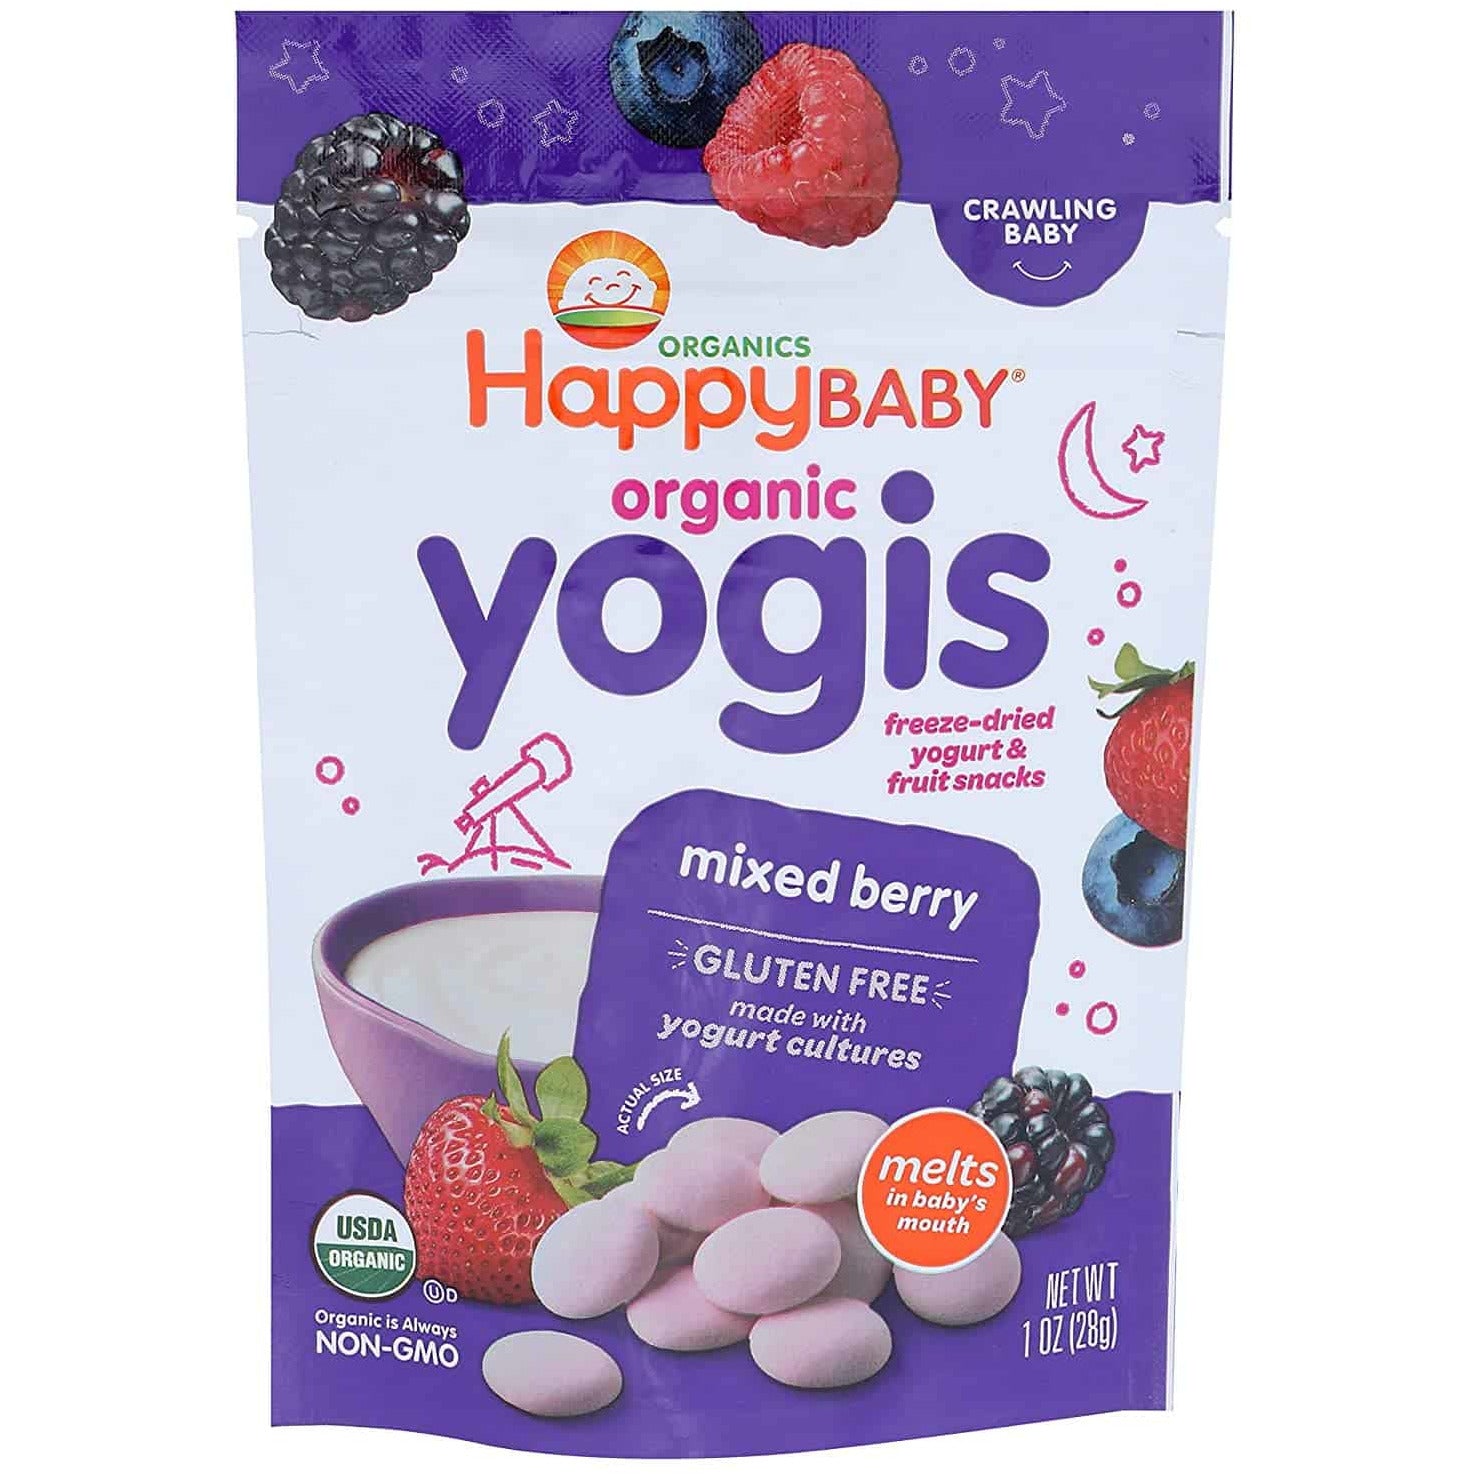 Happy Baby Organic Yogis Freeze-Dried Yogurt & Fruit Snacks Mixed Berry, Organic Gluten-Free Easy to Chew Probiotic Snacks for Babies & Toddlers, 1 Ounce, Pack of 1